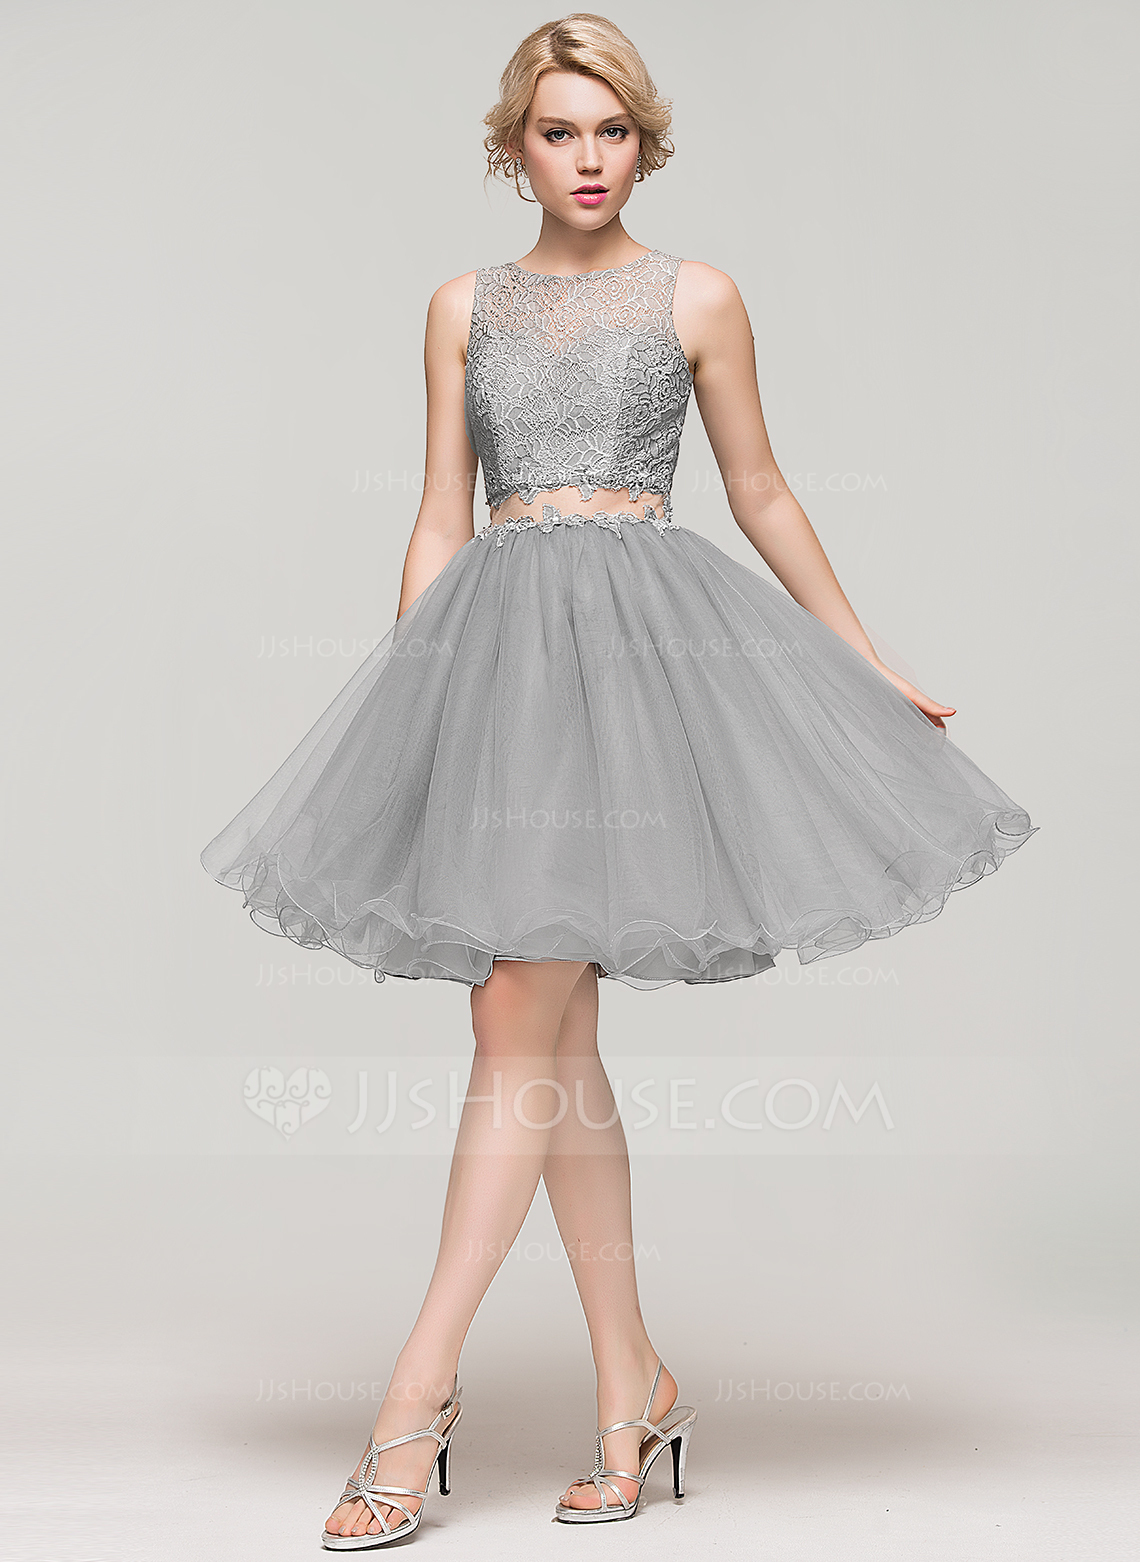 Tulle Dresses a-line/princess scoop neck knee-length tulle lace homecoming dress with  beading. loading zoom XHGQPLX